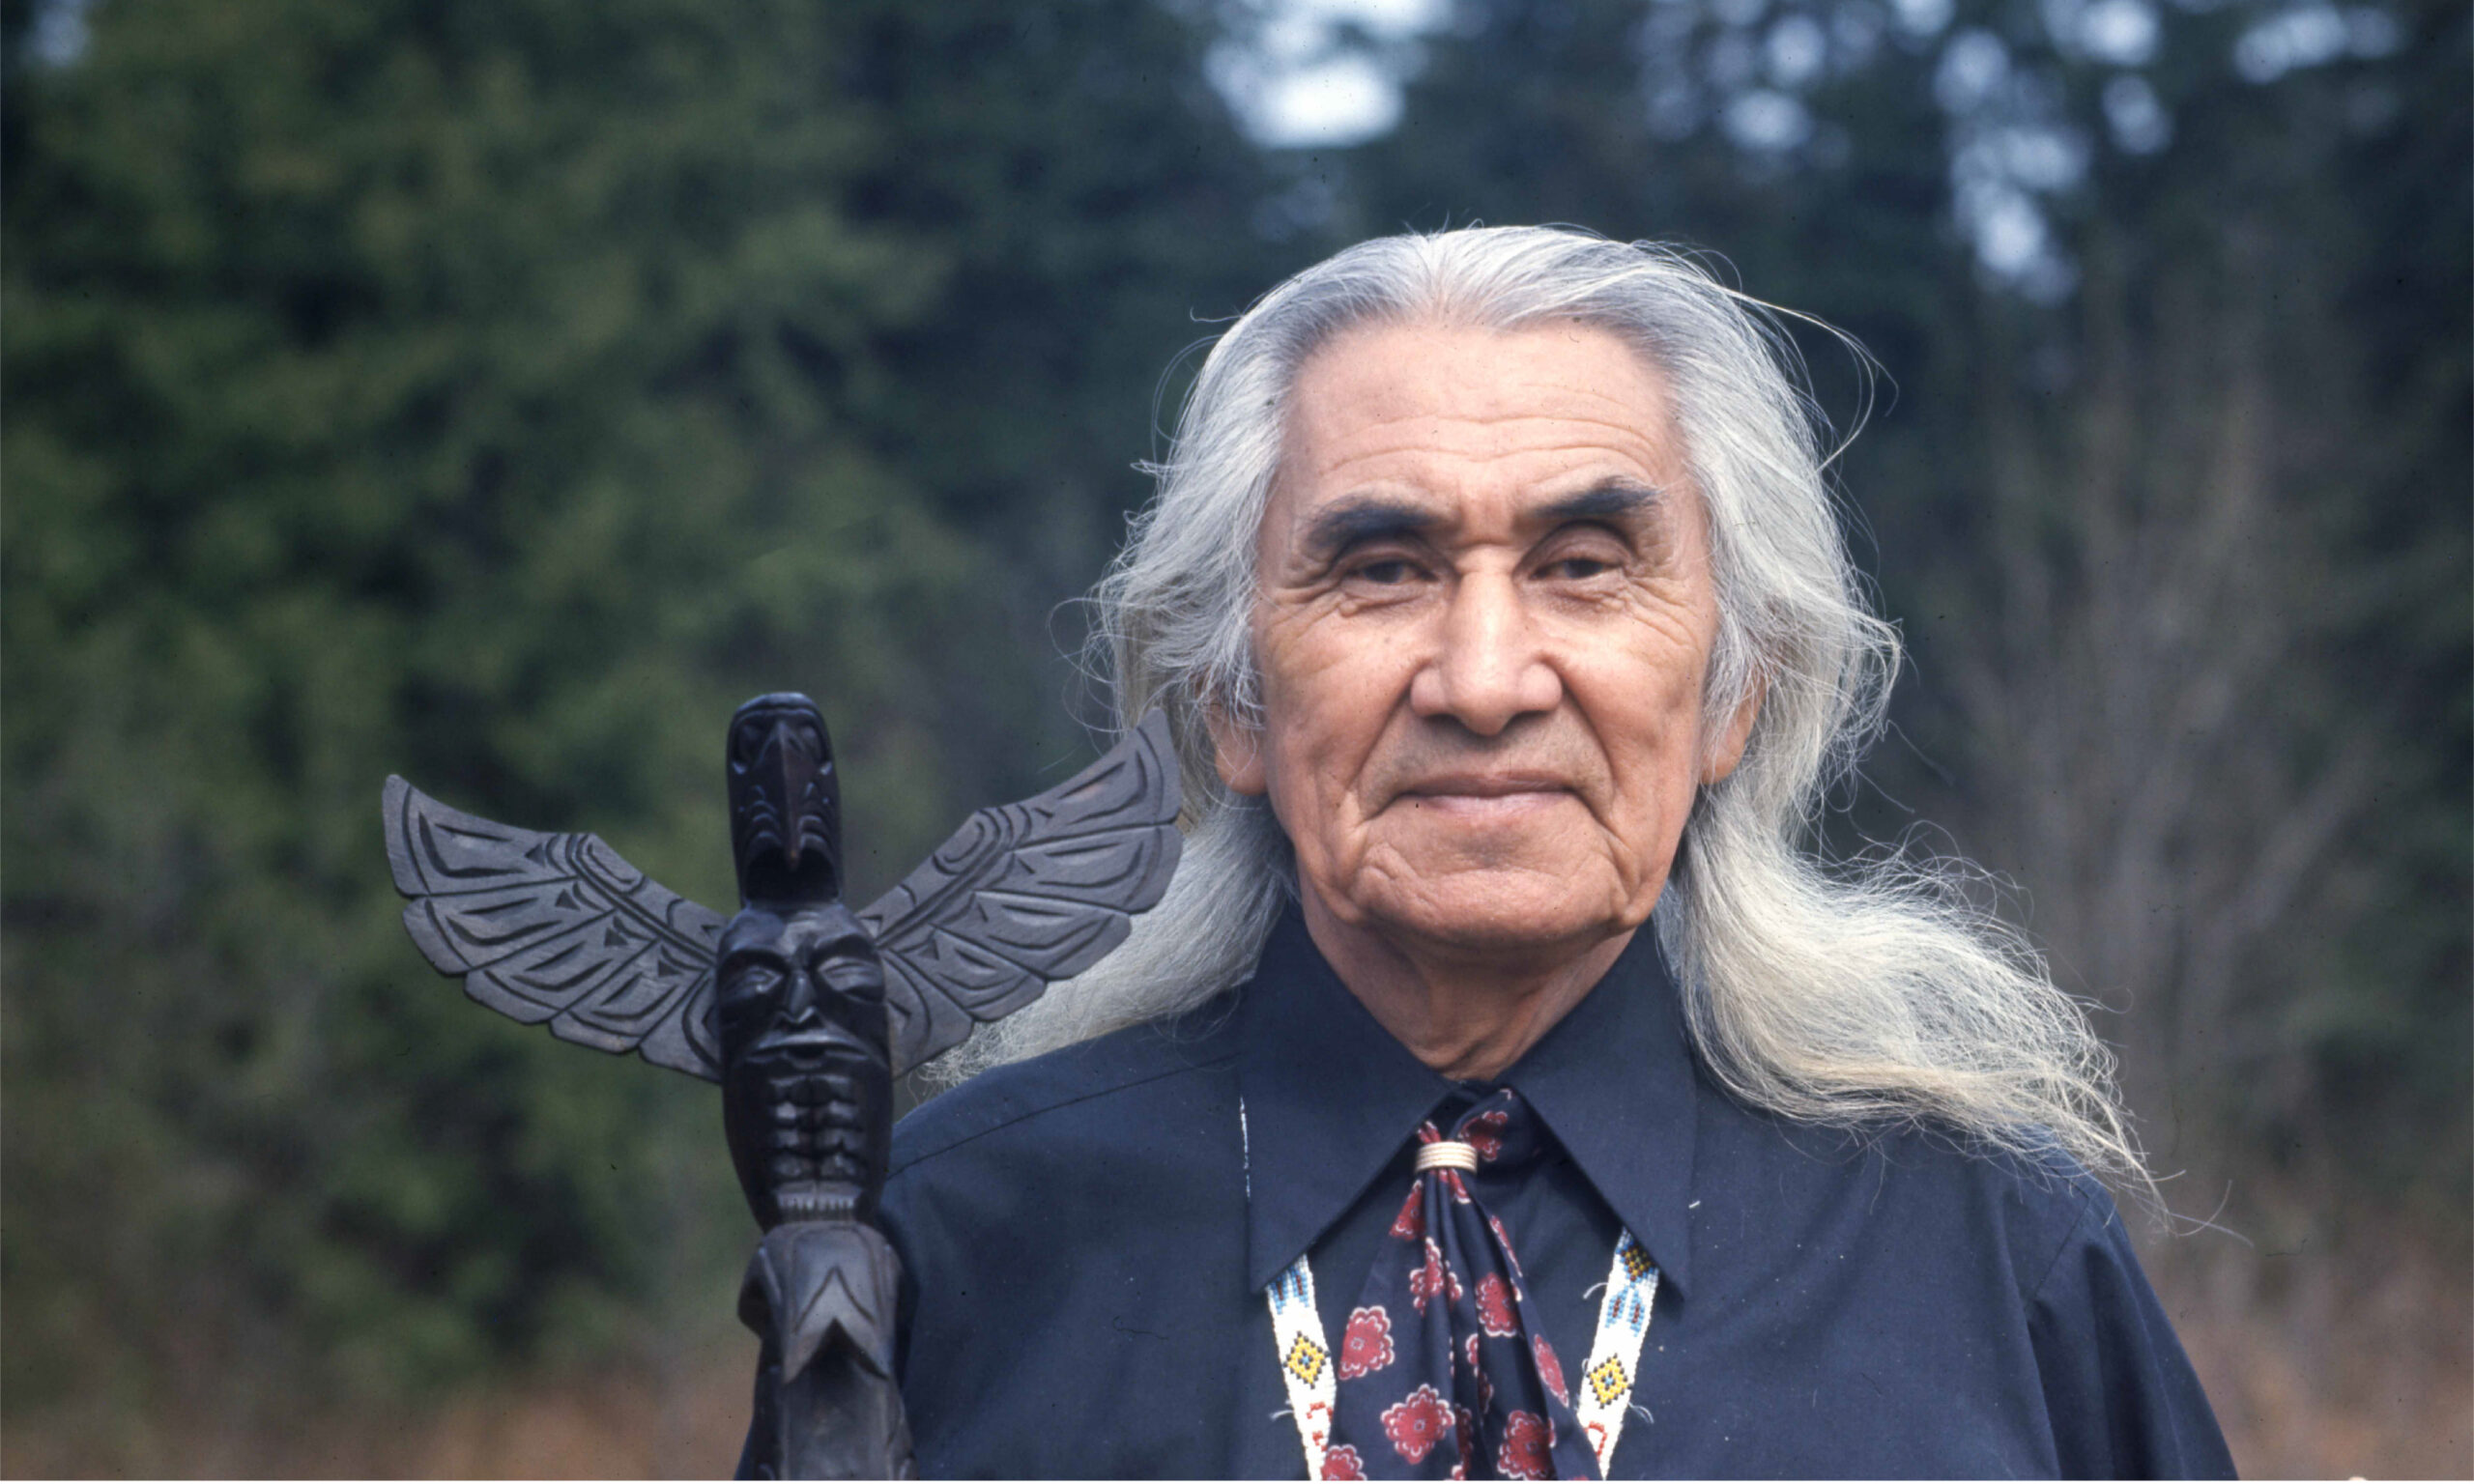 CHIEF DAN GEORGE – ACTOR AND ACTIVIST